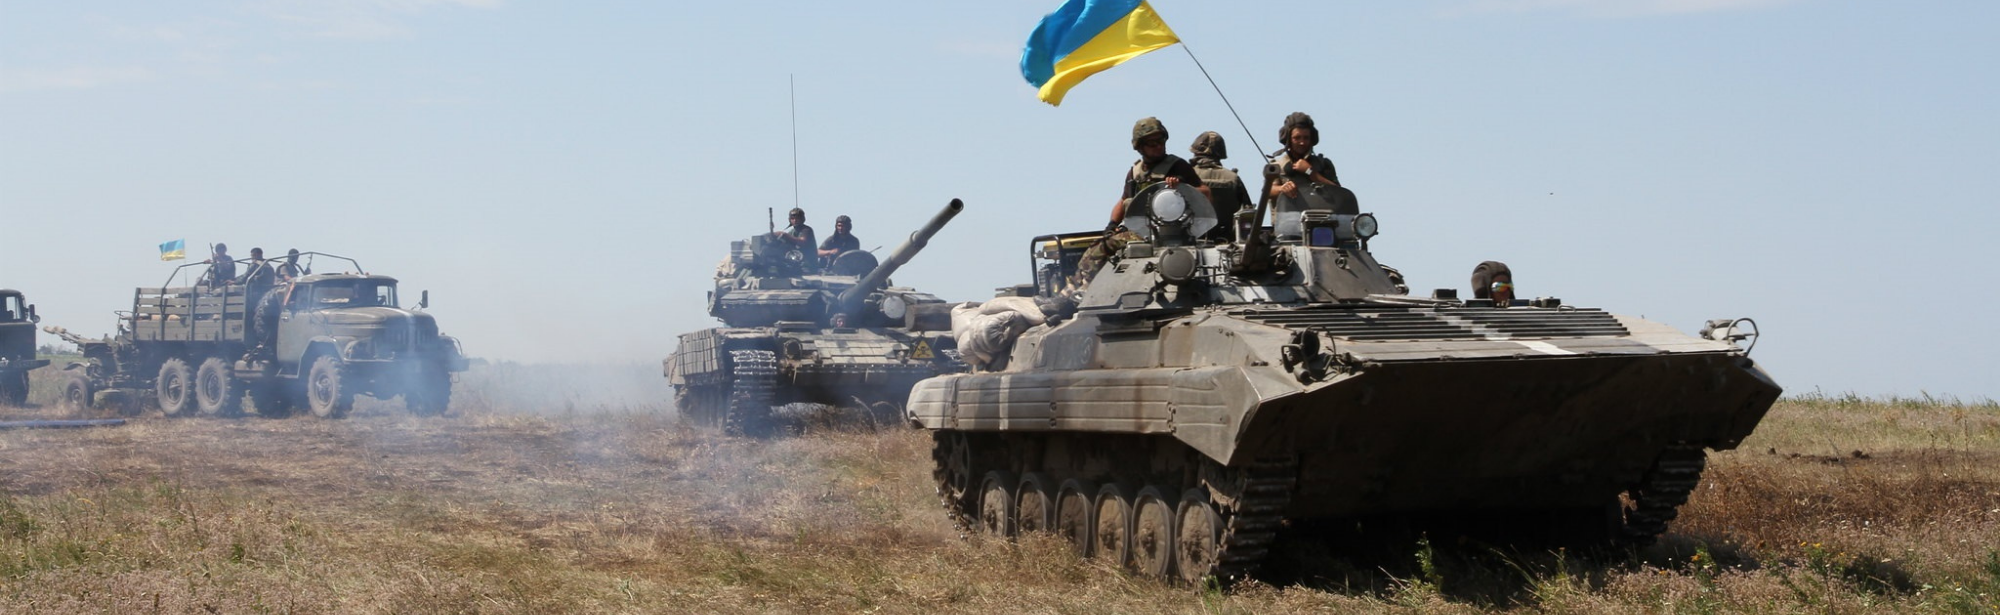 Two Ukrainian battle tanks and a truck on the move through a field.